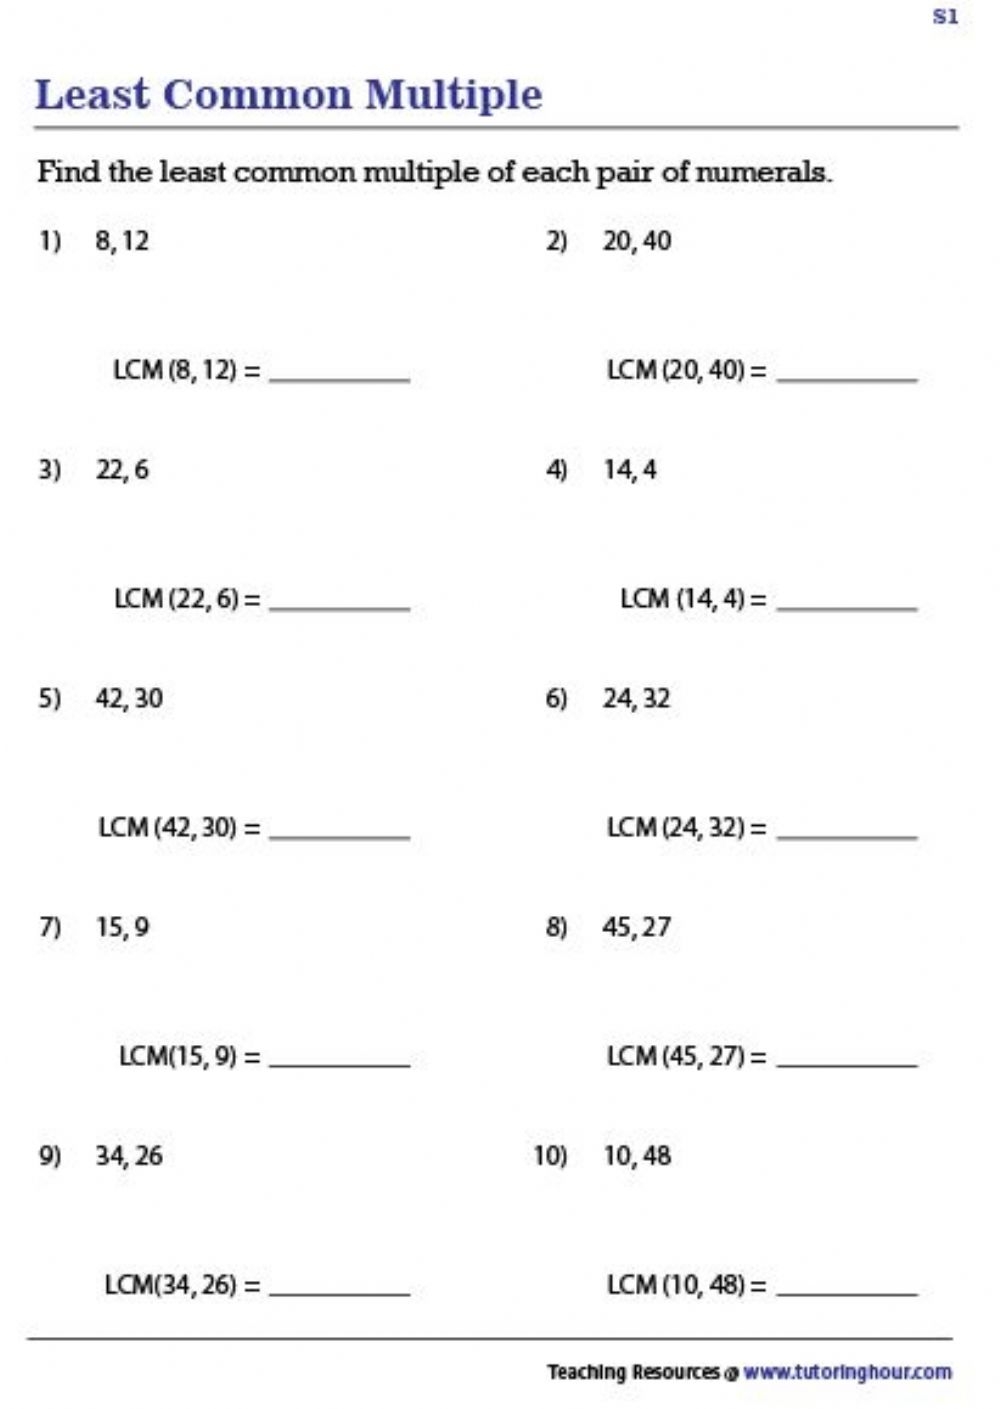 Least Common Multiple Worksheets With Answers - Printable Worksheets